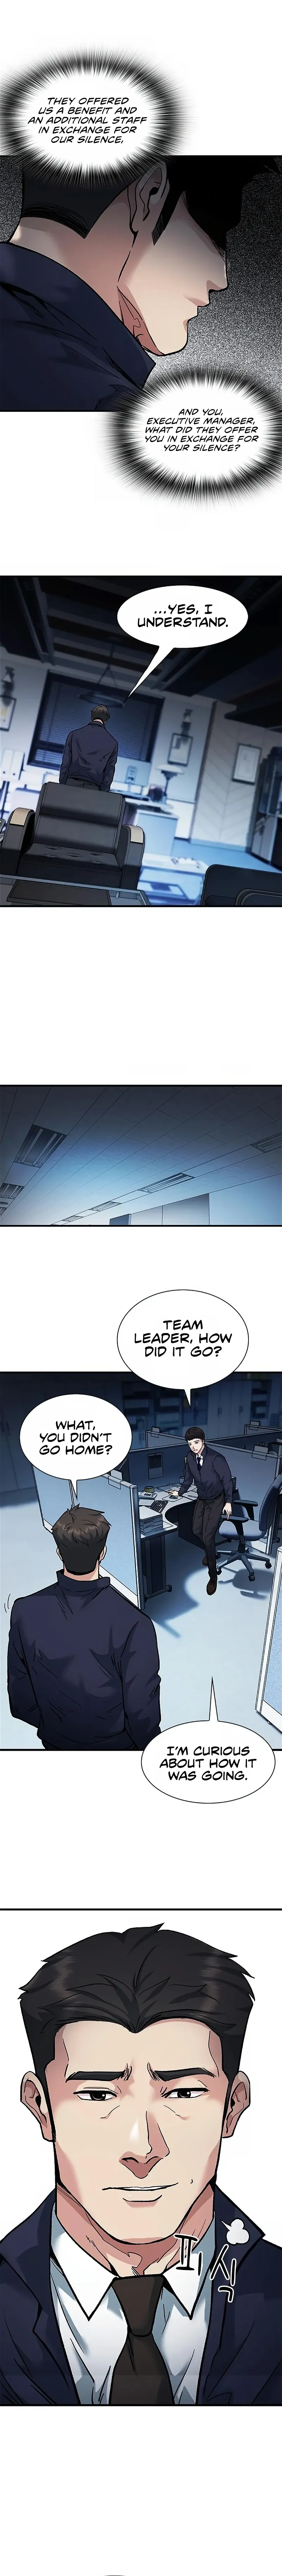 Chairman Kang: The Newcomer Chapter 8 page 18